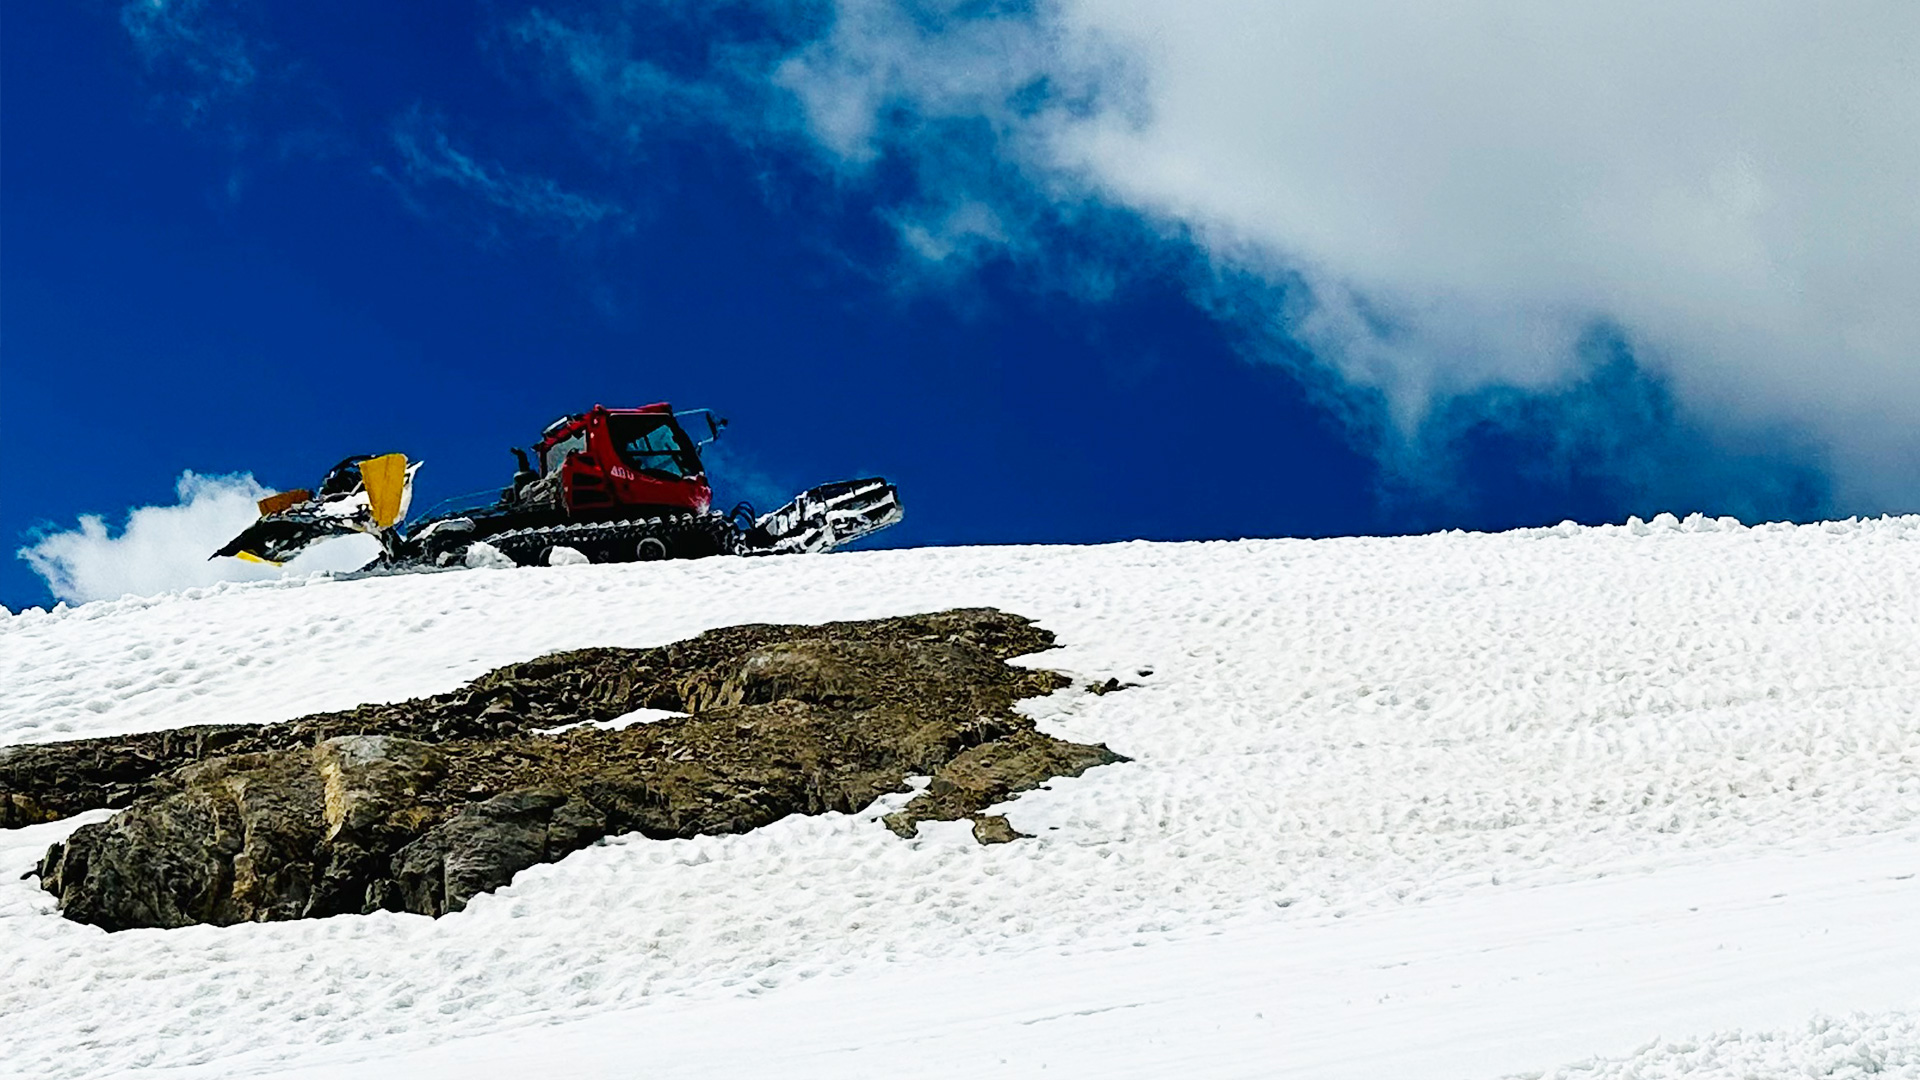 Piste Bashing and snow harvesting on the glacier